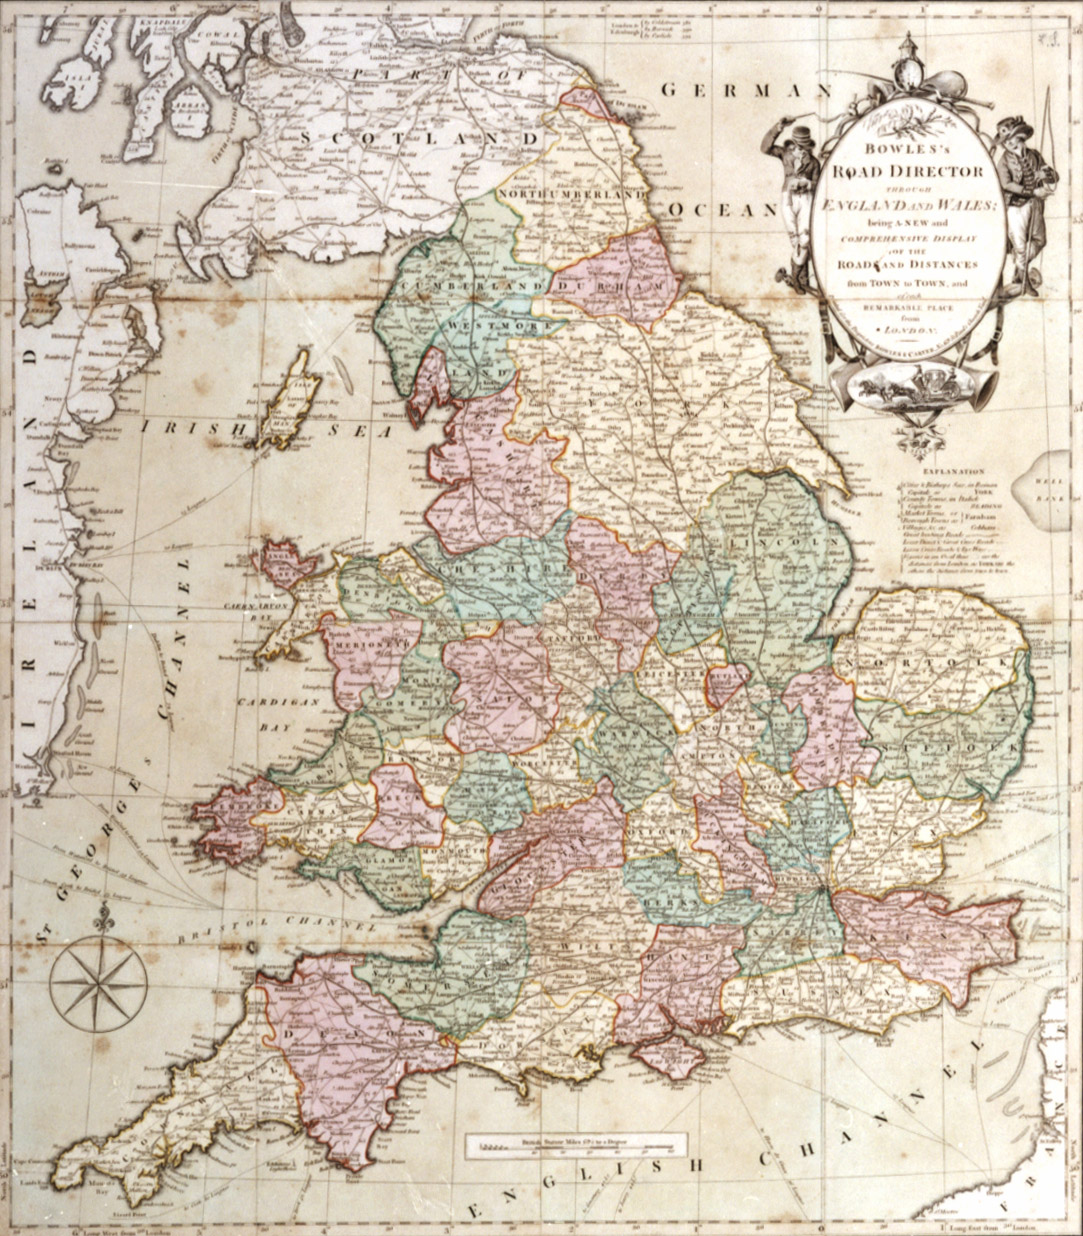 Over 700 maps from 1757-c.1990 - Showing circulation of mail, surveyors’ maps and a few town maps